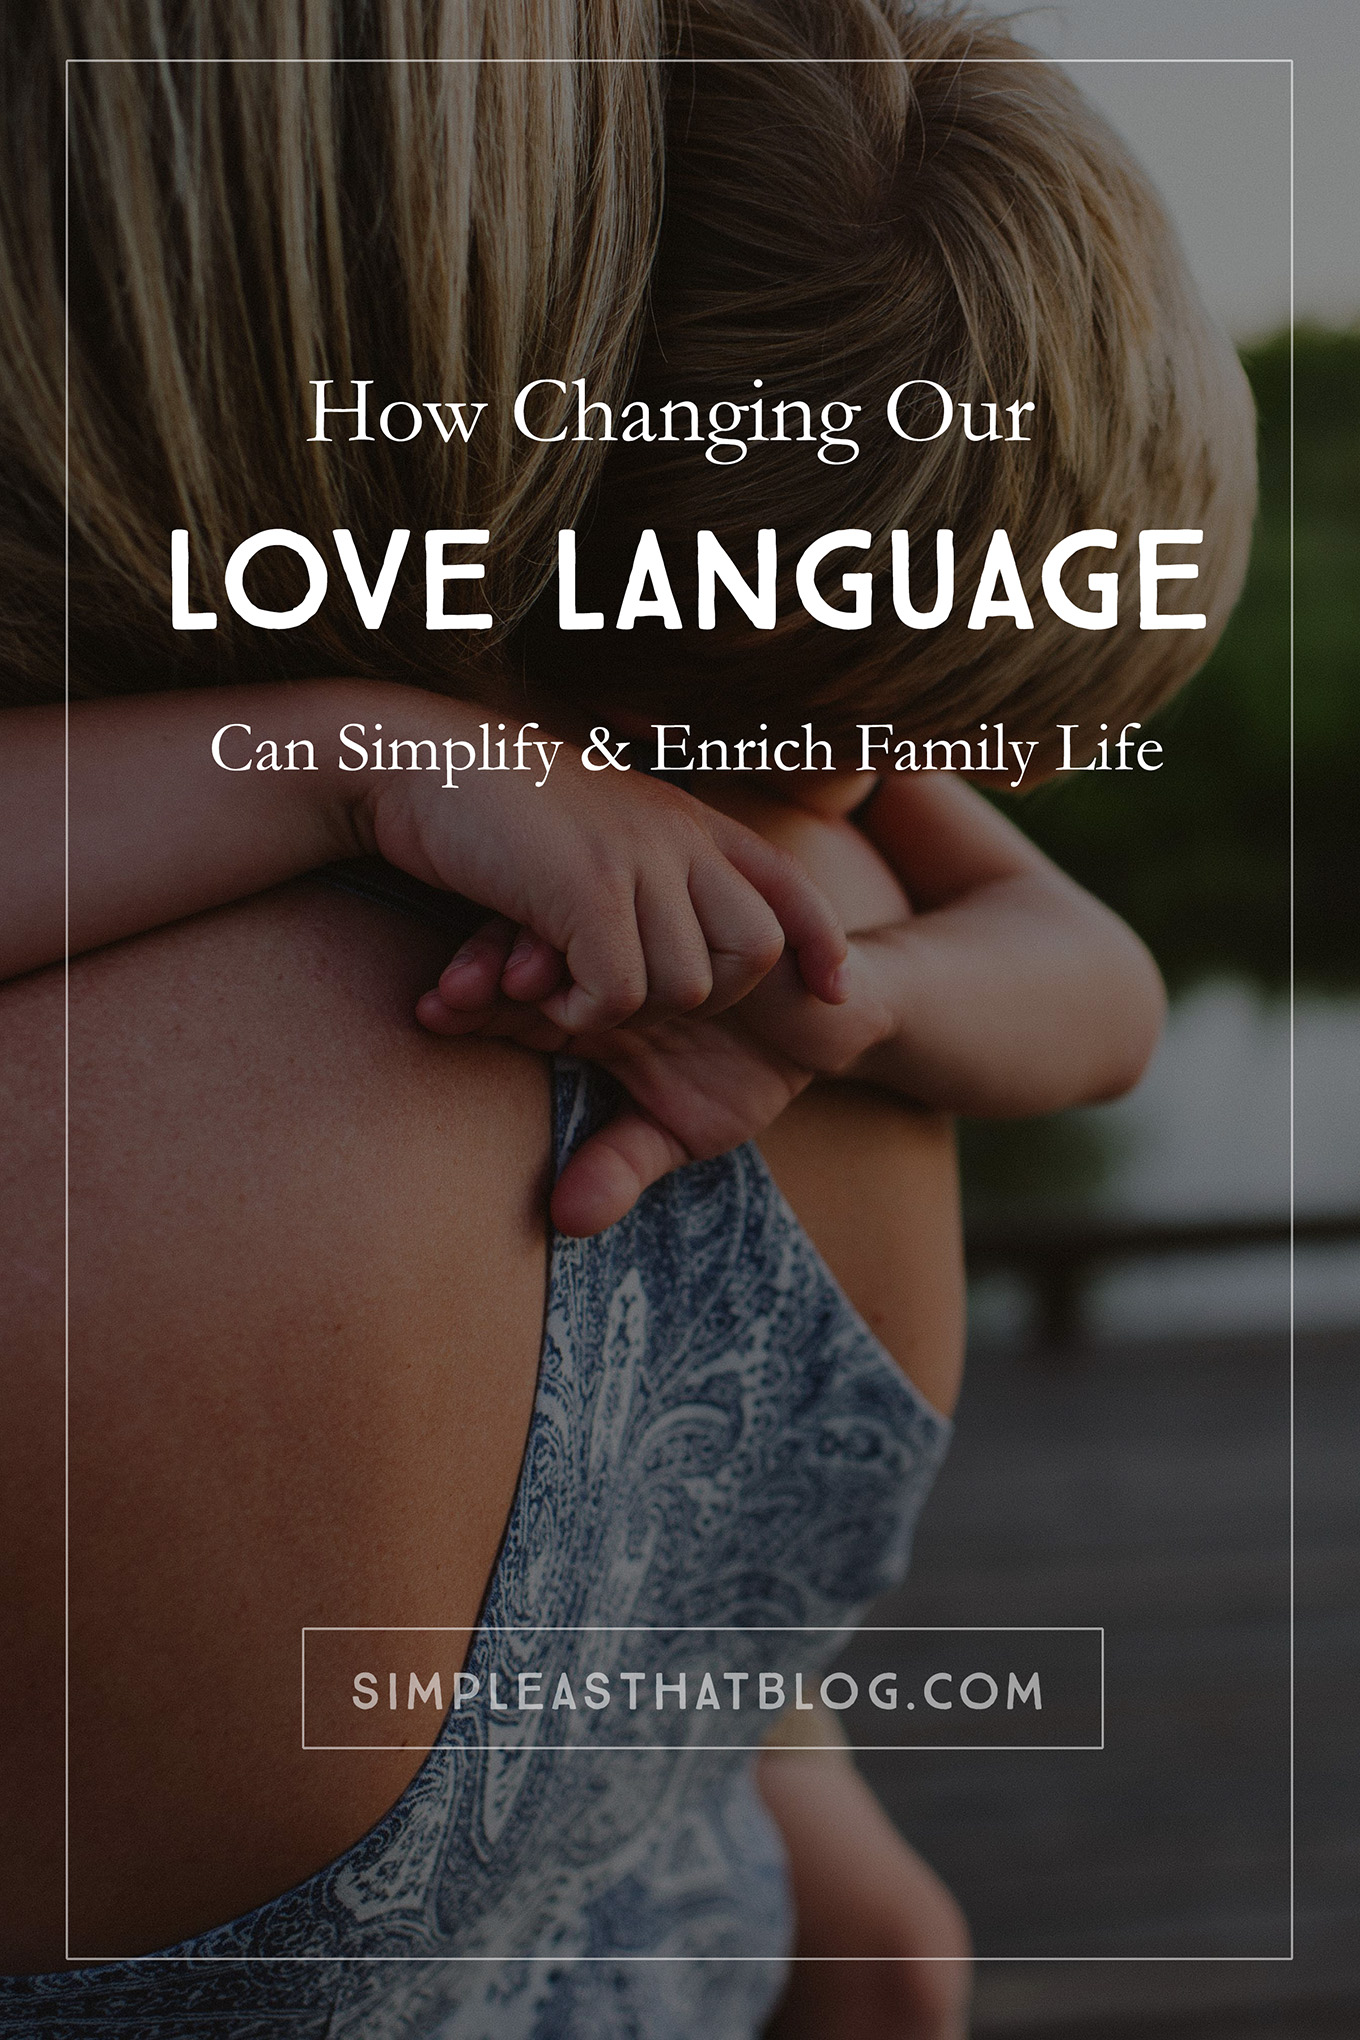 Making sure that we include as many of the five love languages into our family life as possible enriches our relationships but also has the positive knock on effect of reducing clutter and limiting toys as we naturally tend towards expressing love through other means.